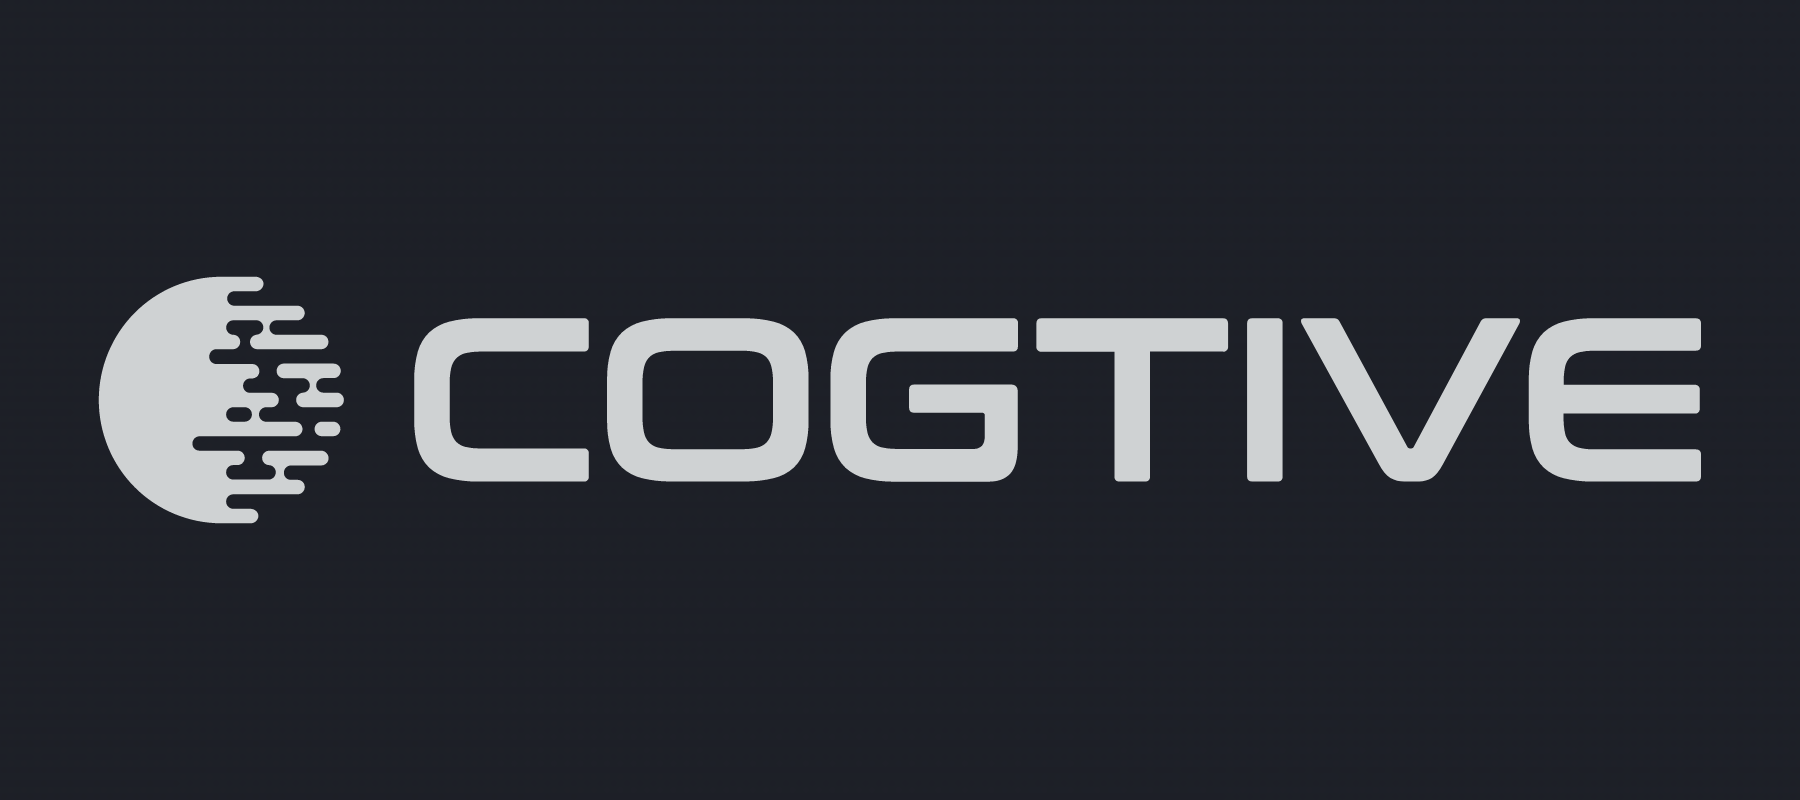 Brazilian startup Cogtive receives R$10m investment to revolutionize the manufacturing industry